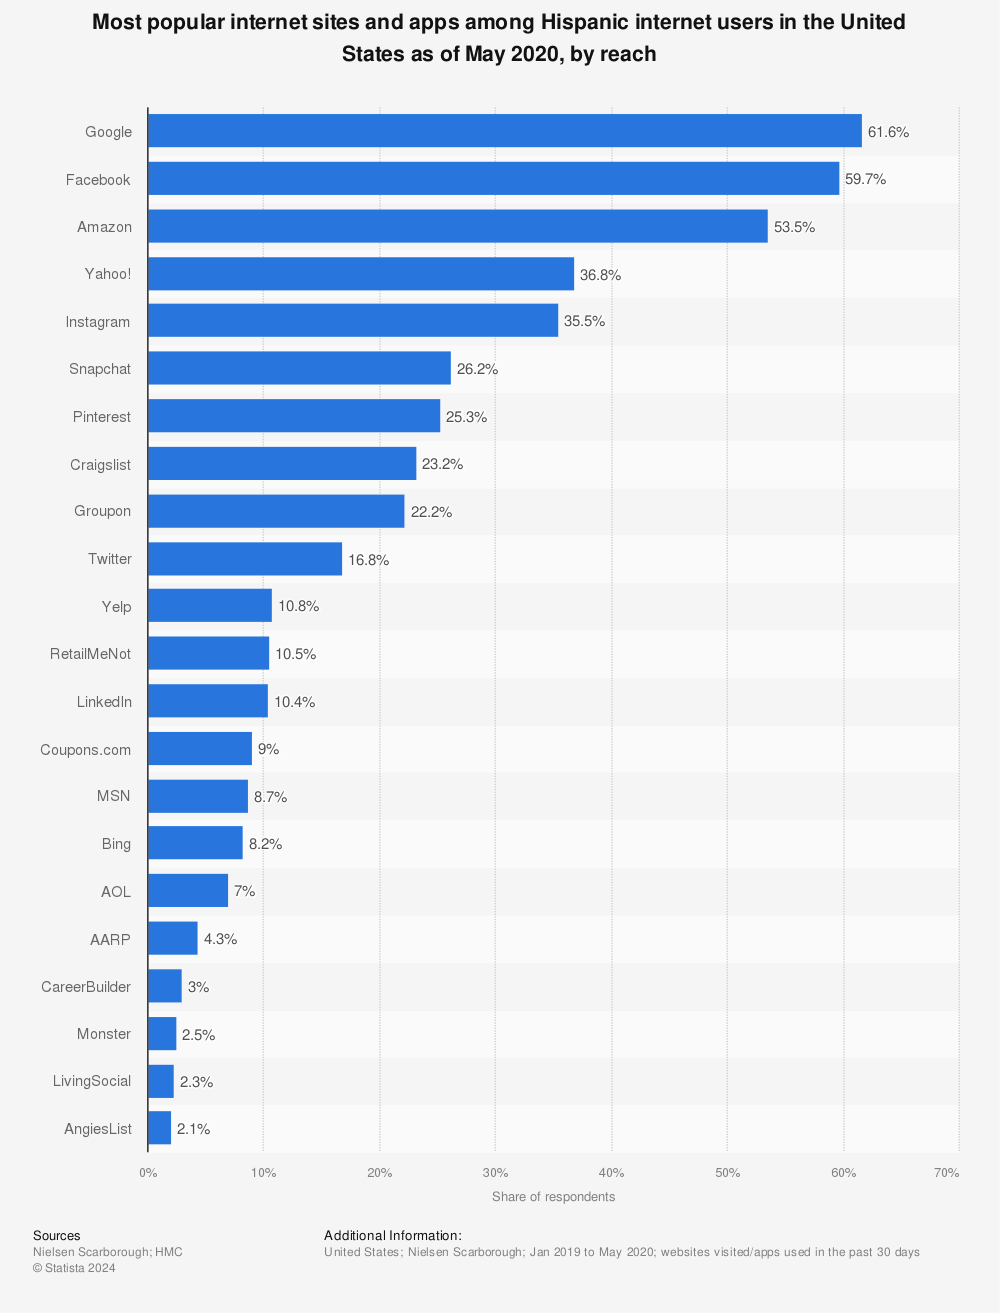 Statistic: Most popular internet sites and apps among Hispanic internet users in the United States as of May 2020, by reach | Statista